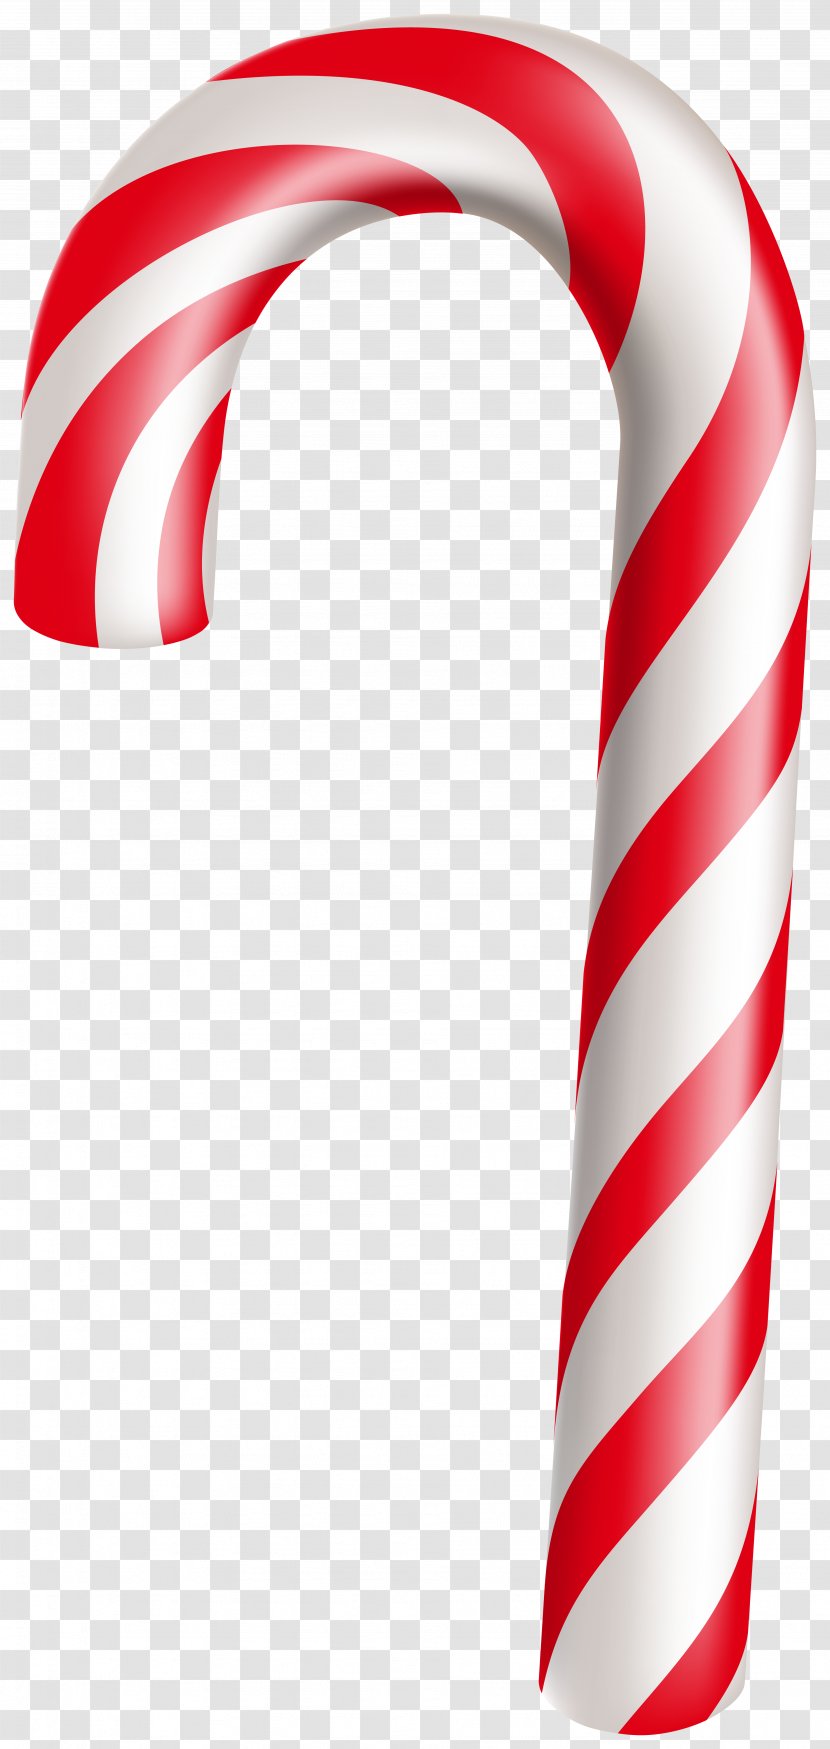 Candy Cane Christmas Graphics Clip Art Day - Stockings Insignia Transparent PNG